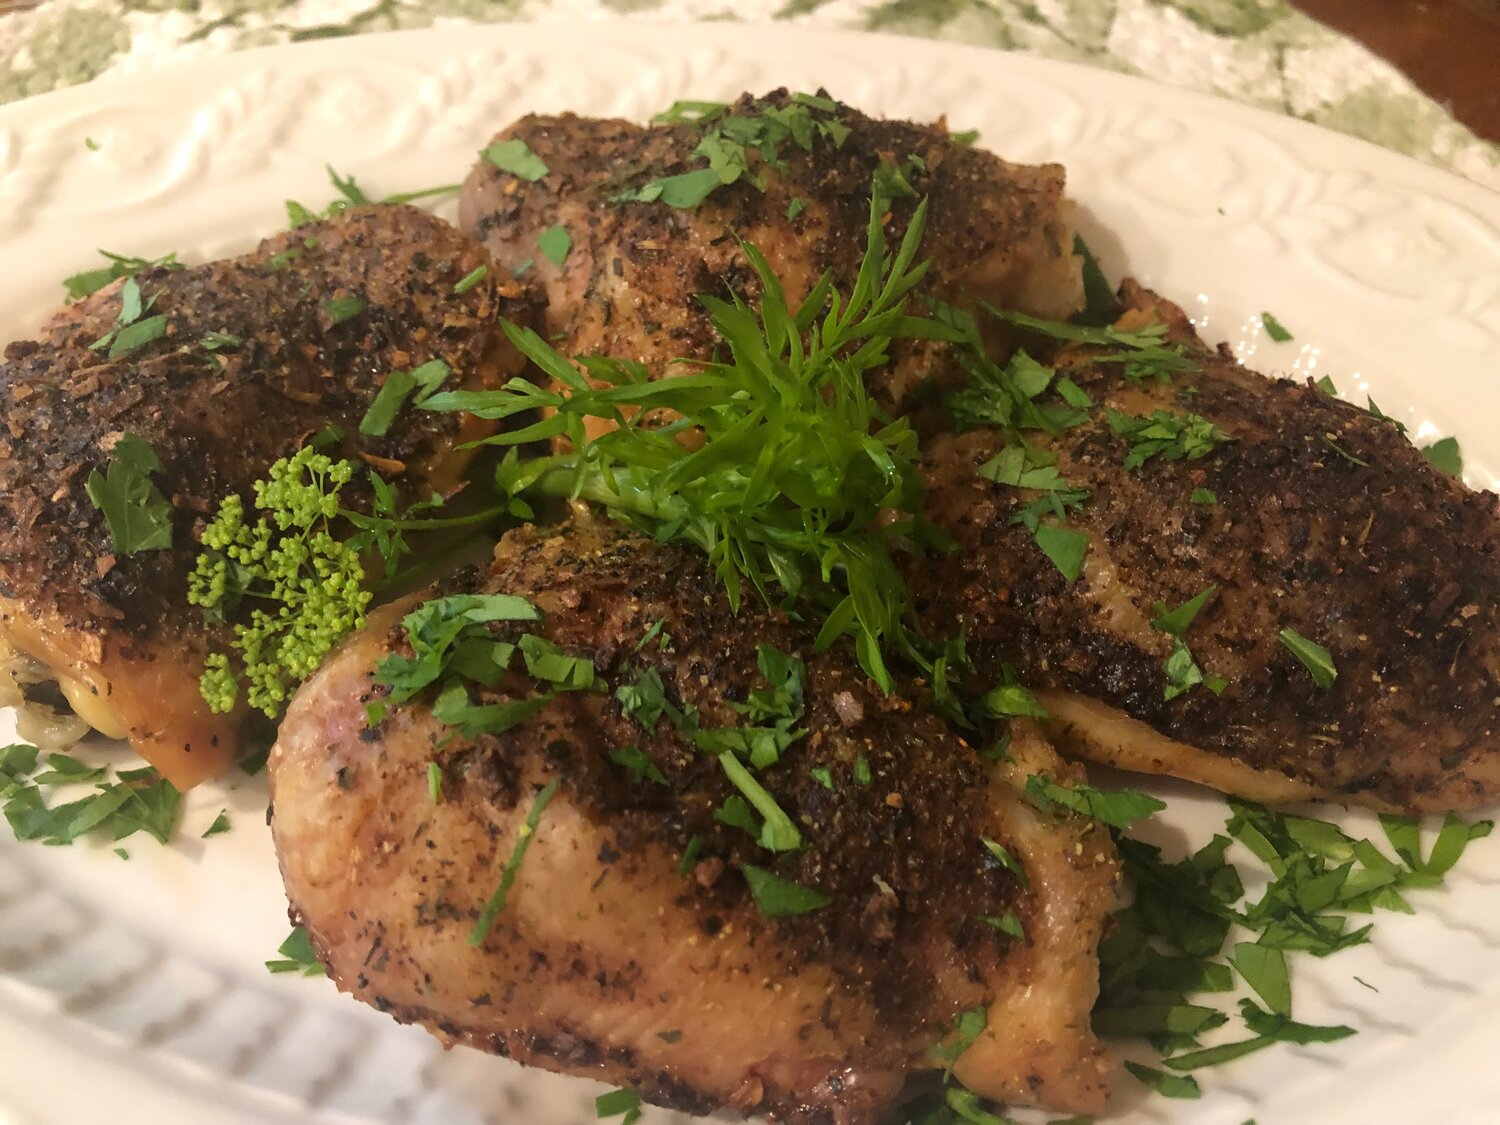 Green Goddess Chicken Thighs are cooked low and slow, yielding a meat with texture and taste similar to duck confit.